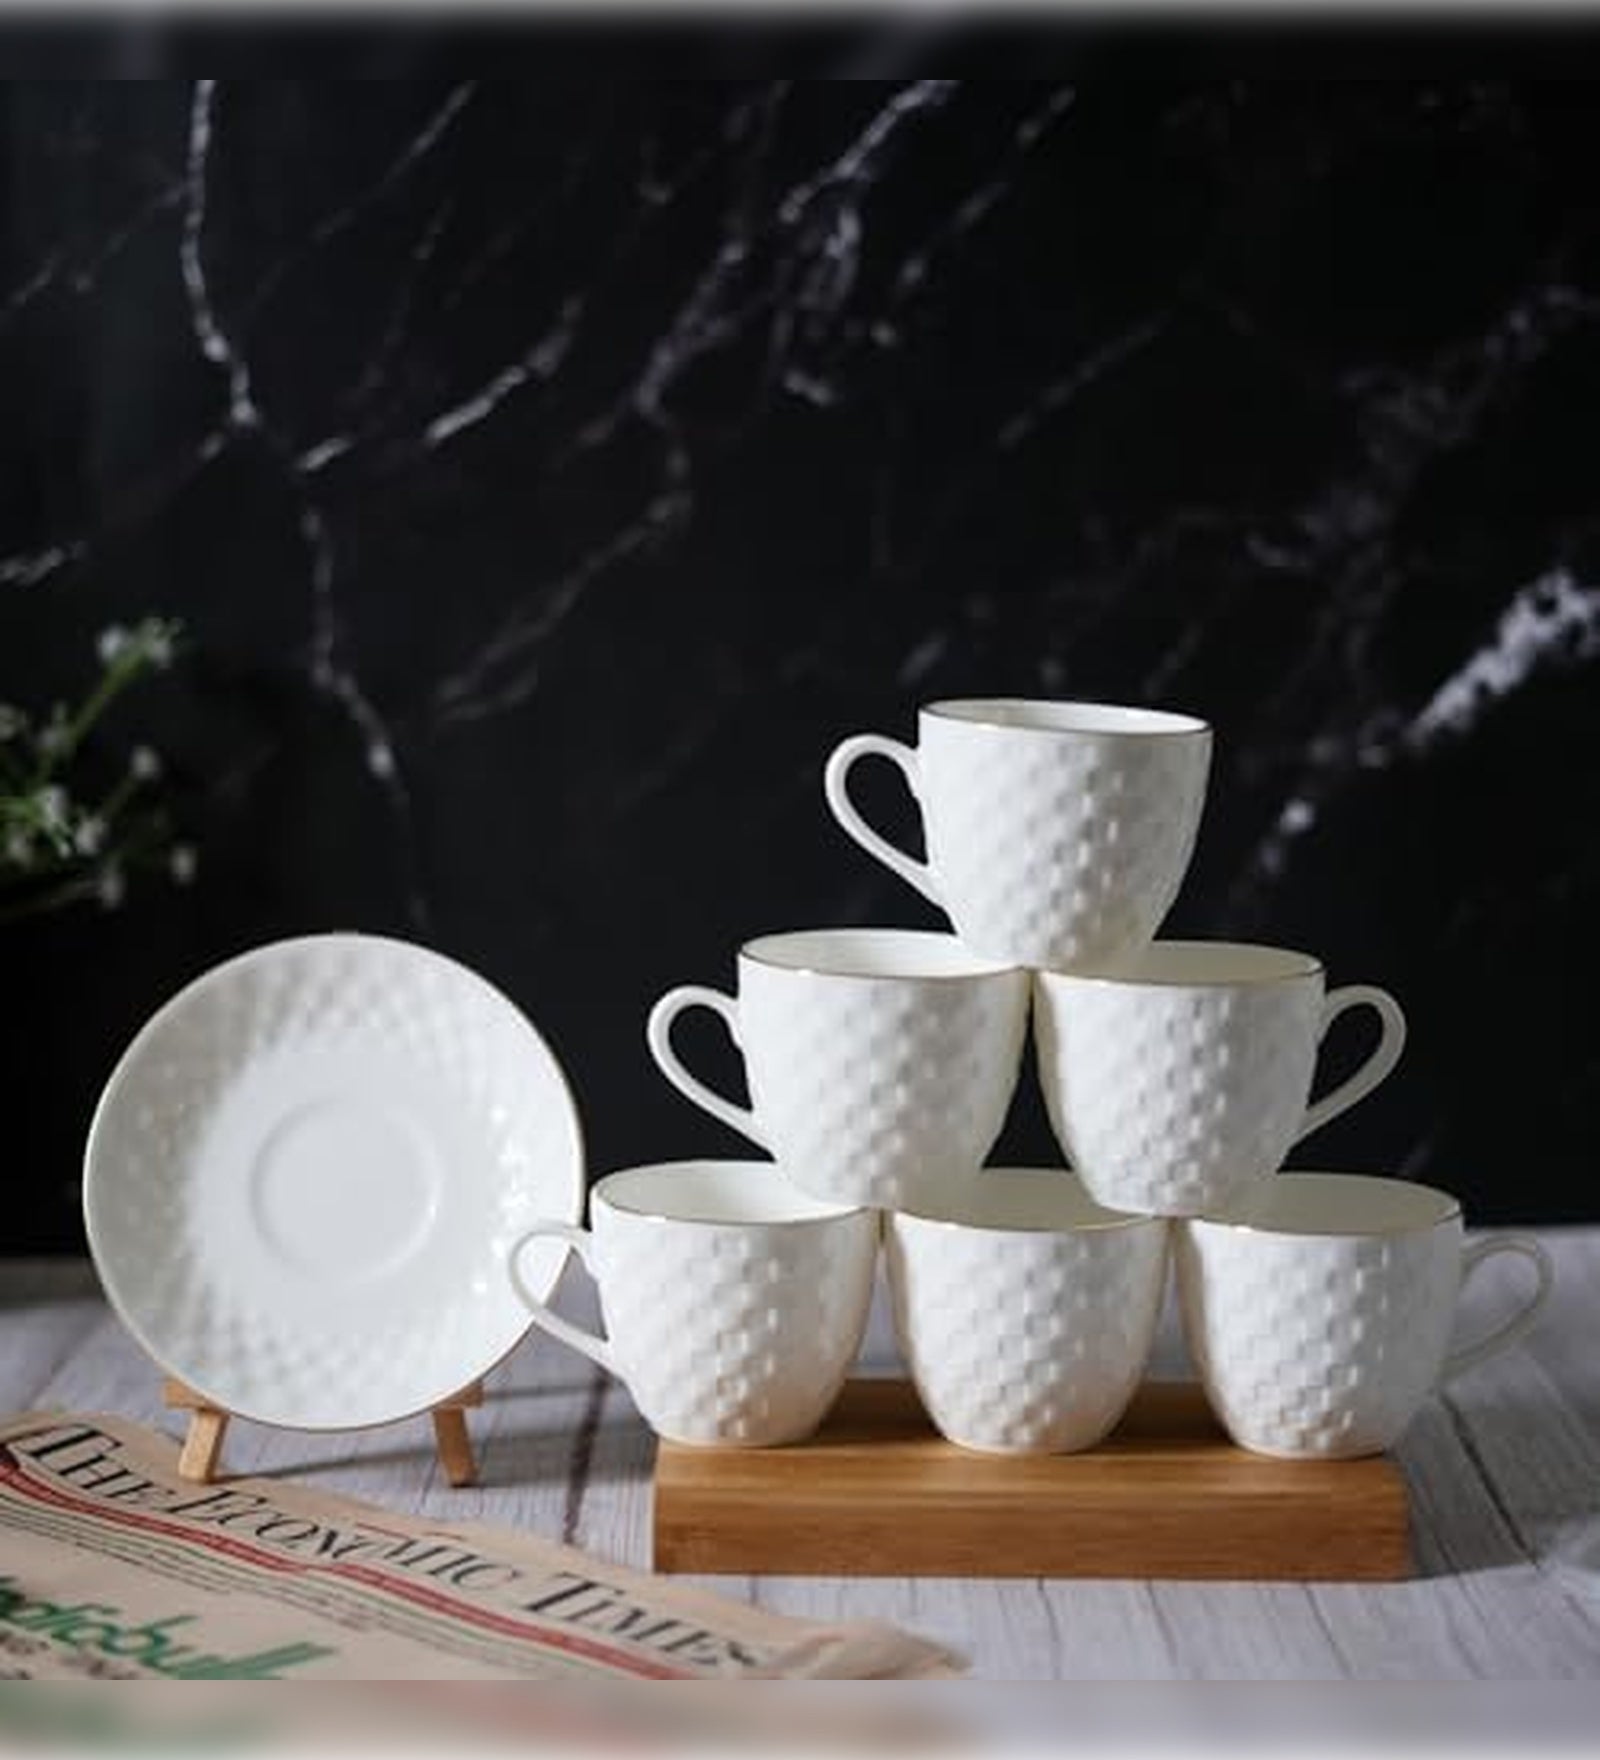 Femora Gold Line Tile Cut White Ceramic Tea Cups and Saucers with Tea Kettle Set -200 ml Set of 13 (6 Cups, 6 Saucer, 1 Kettle)